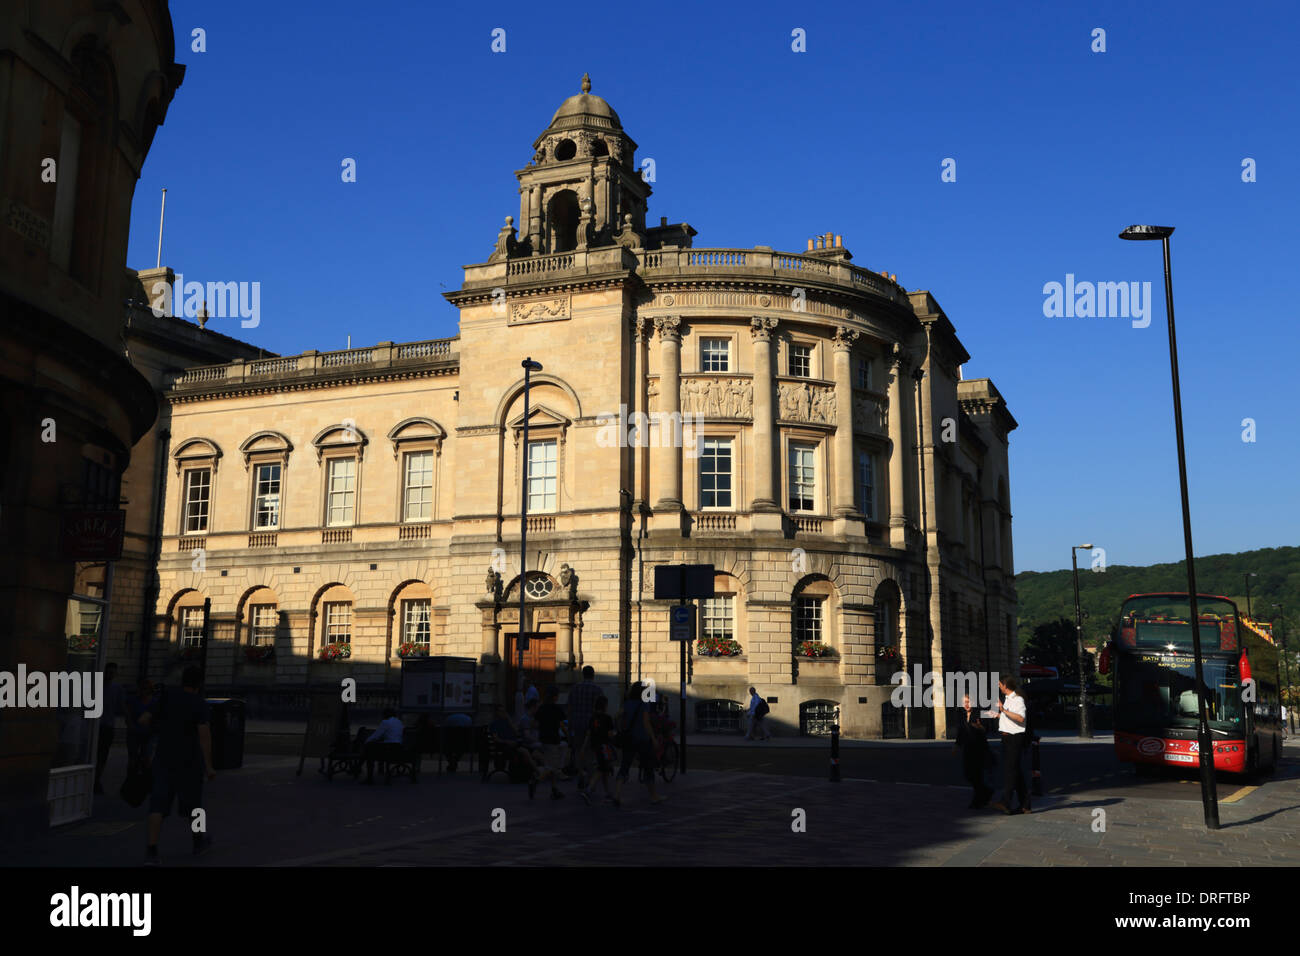 A beautiful Georgian building on the corner of Cheap and High Streets, against a clear blue sky, in the World Heritage city of Bath in Somerset, UK. Stock Photo